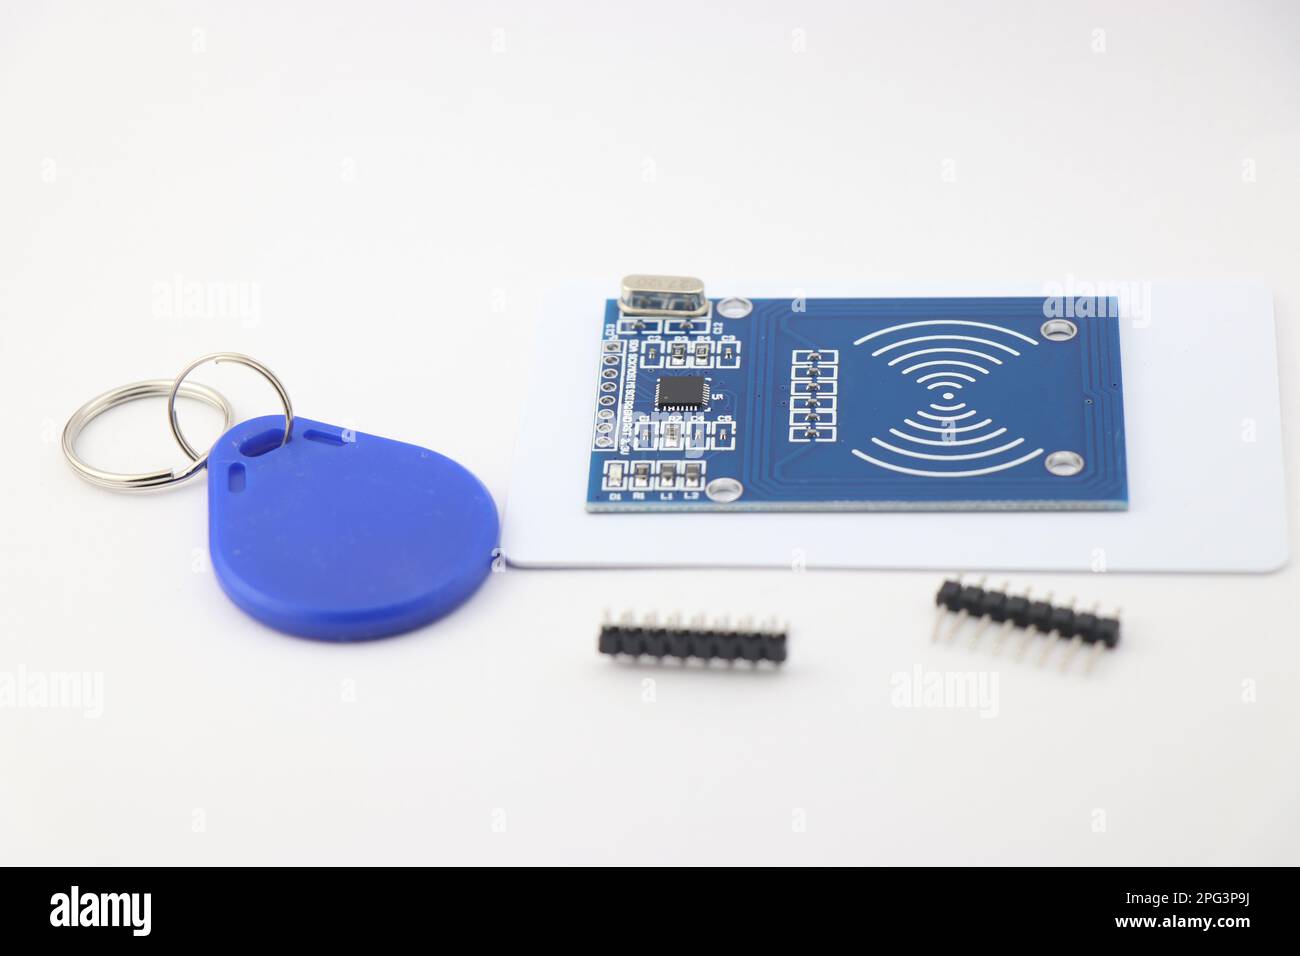 RFID chip sensor with its key tag and Pins for soldering on the board Stock Photo